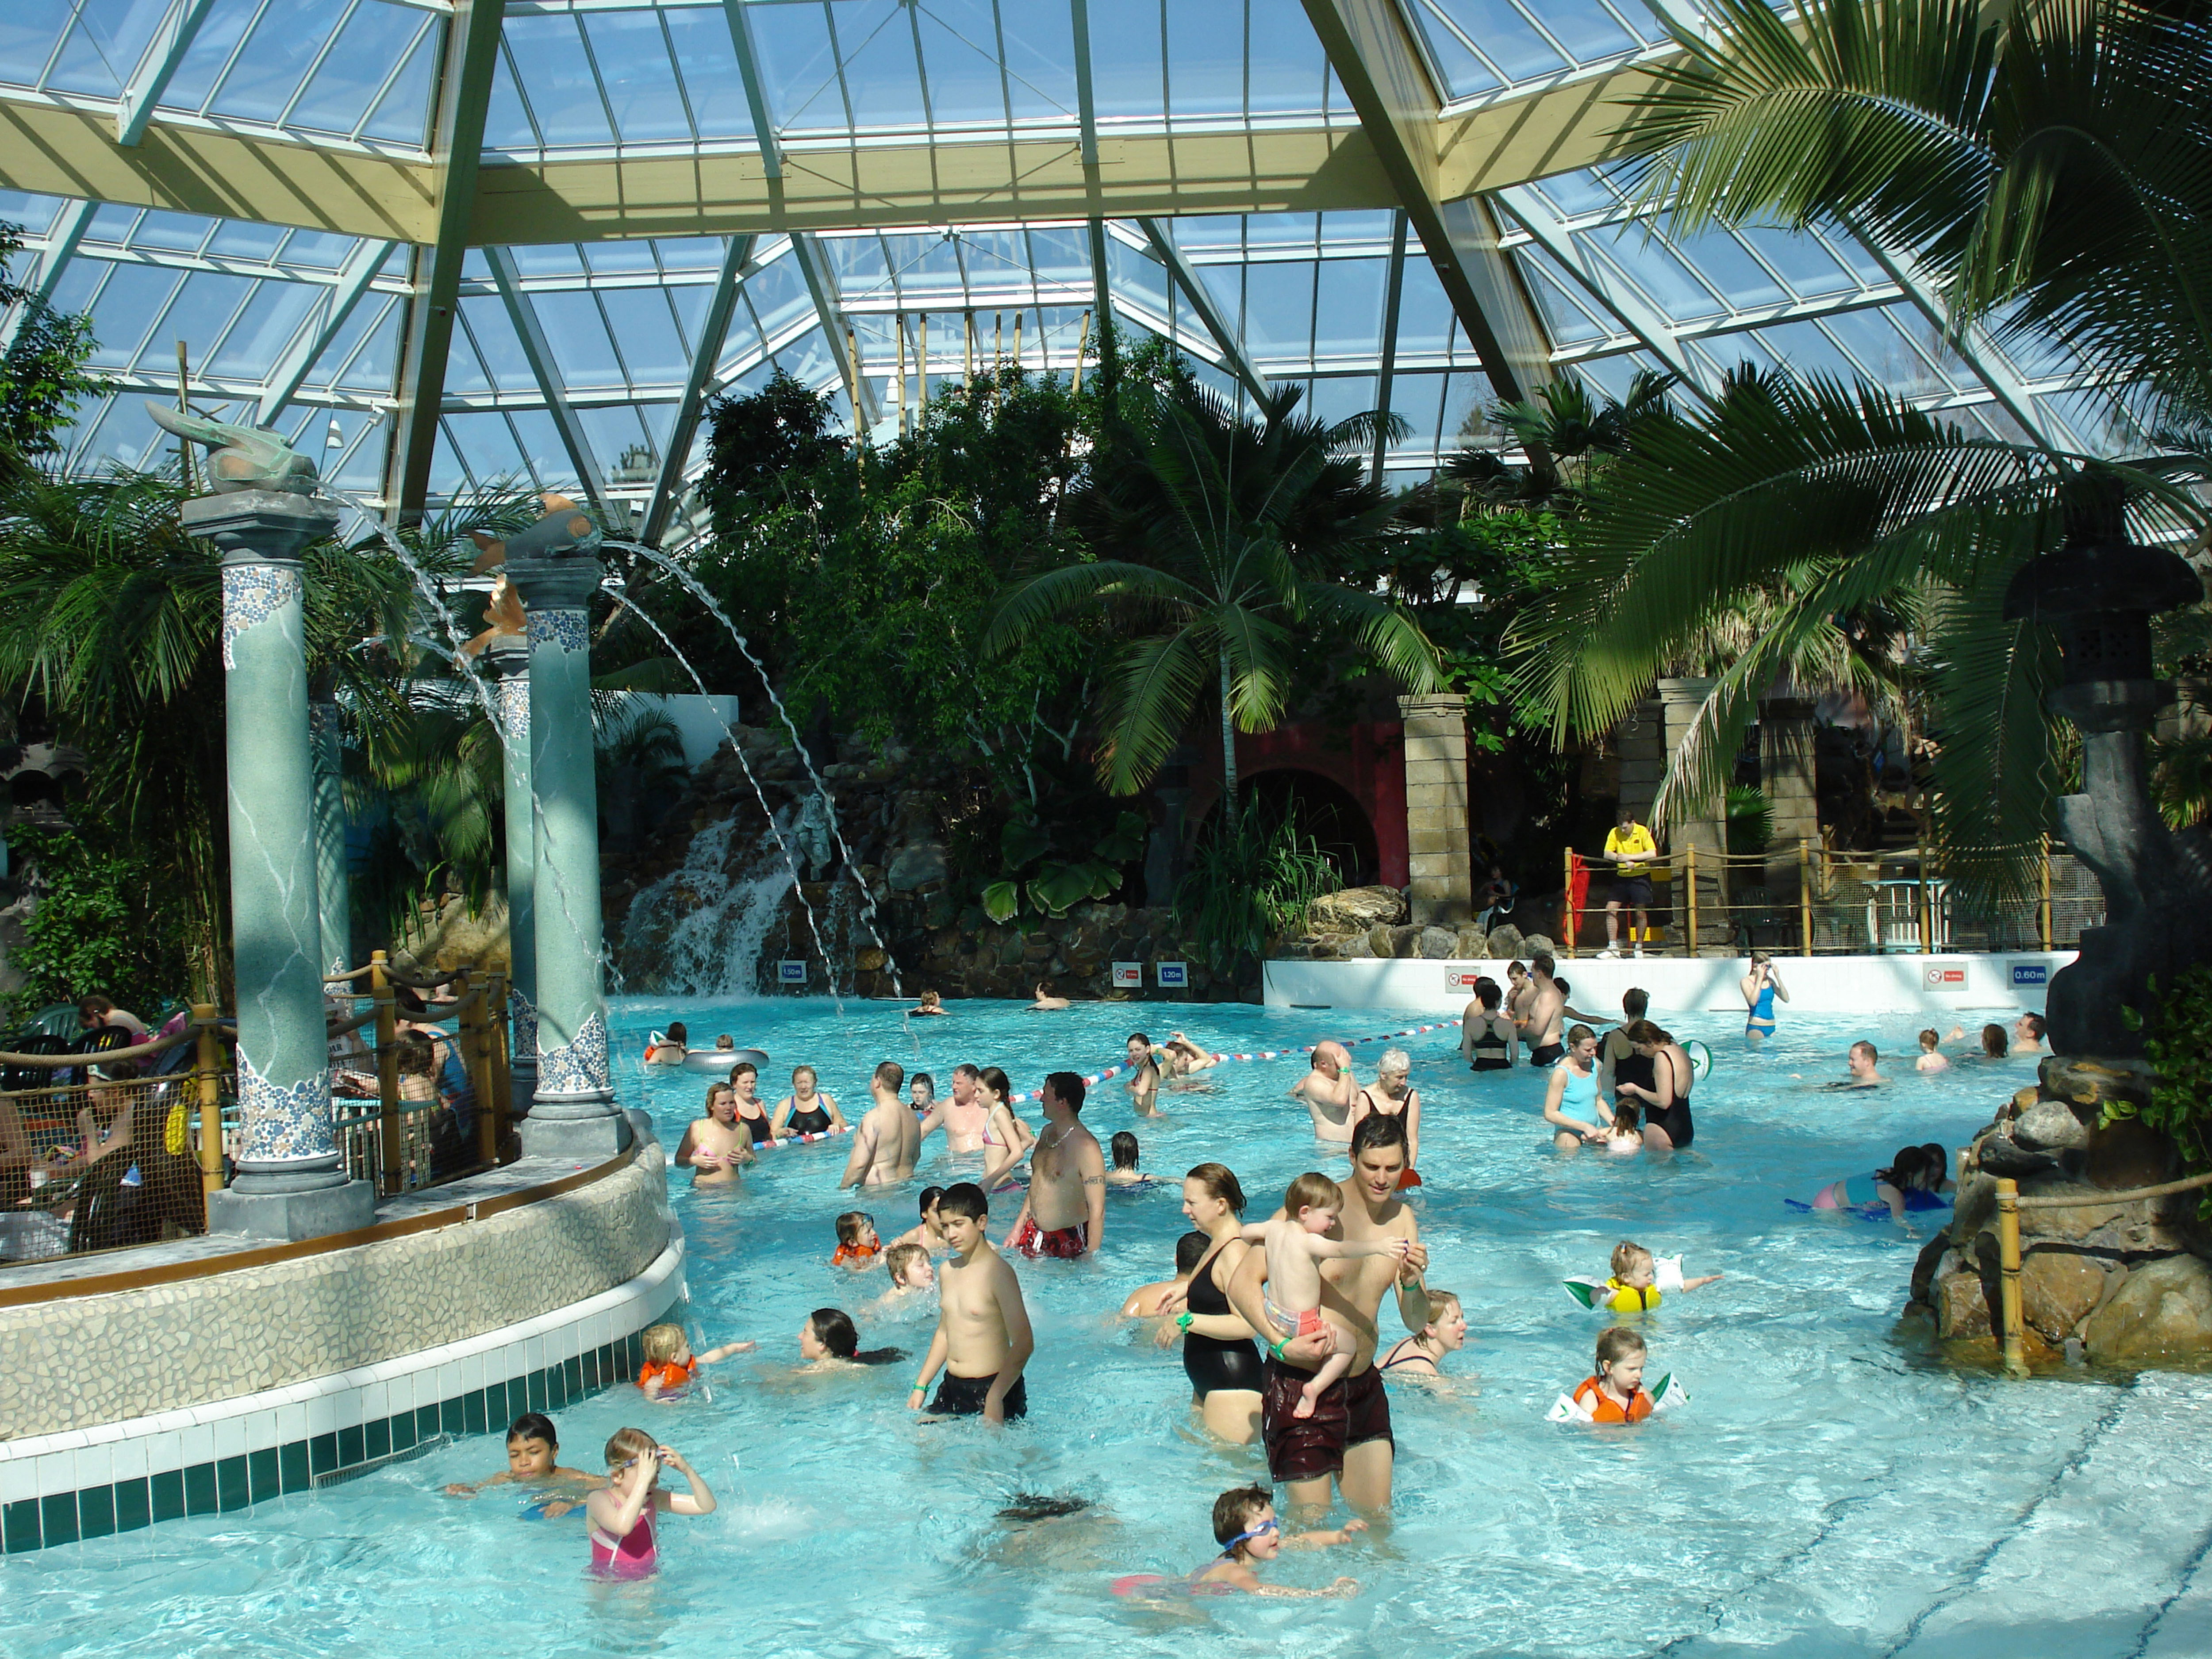 Brit holidaymakers can save £800 on their Center Parcs break by swapping a UK site with a European one